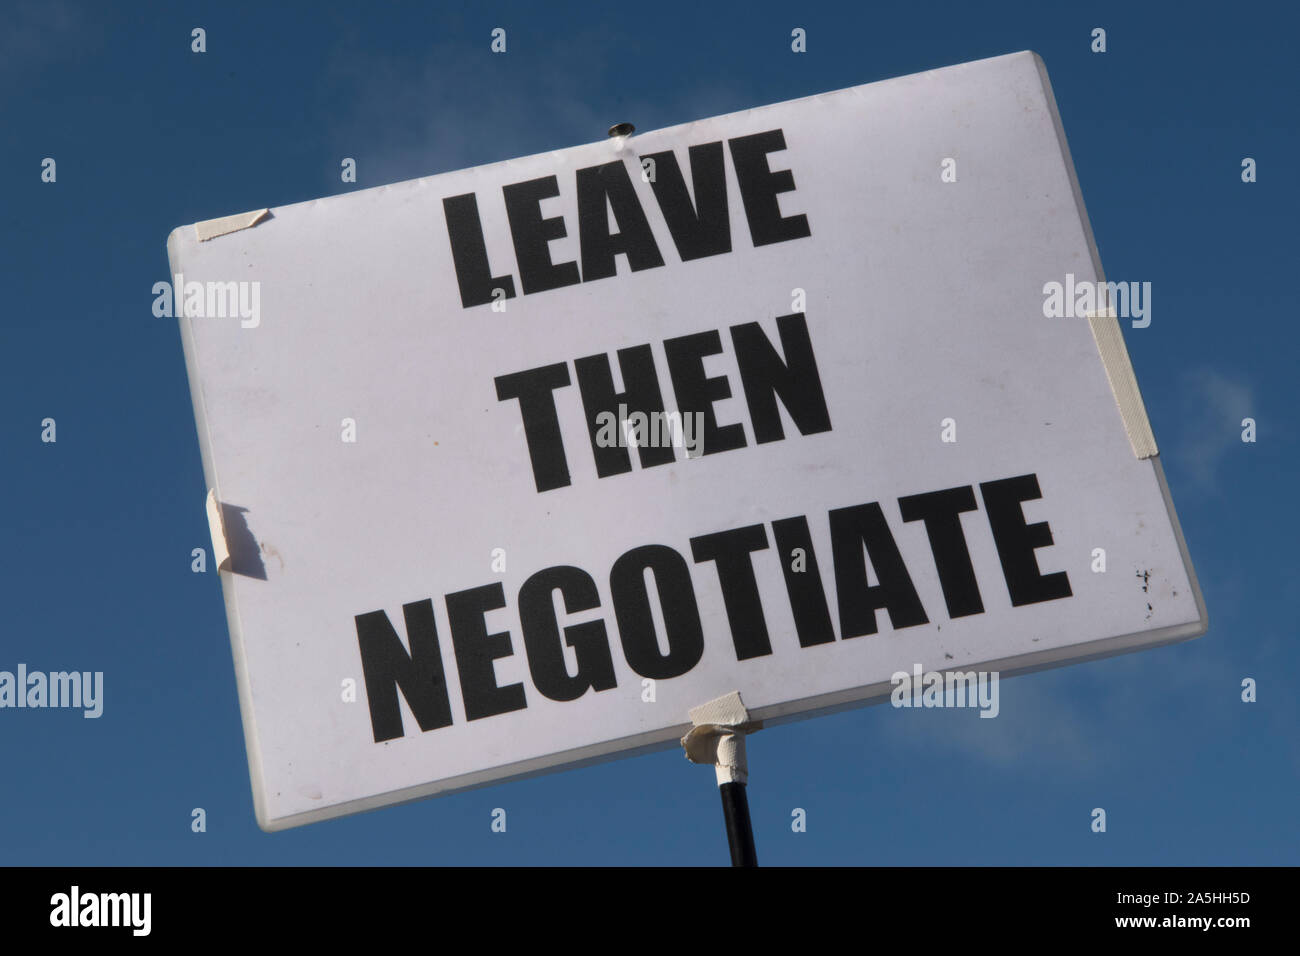 Leave Europe Then Negotiate with the EU. Brexit supporting poster banner at the Peoples Vote Campaign demonstration. Brexit Super Saturday 19 October 2019  Parliament Square London UK. HOMER SYKES Stock Photo